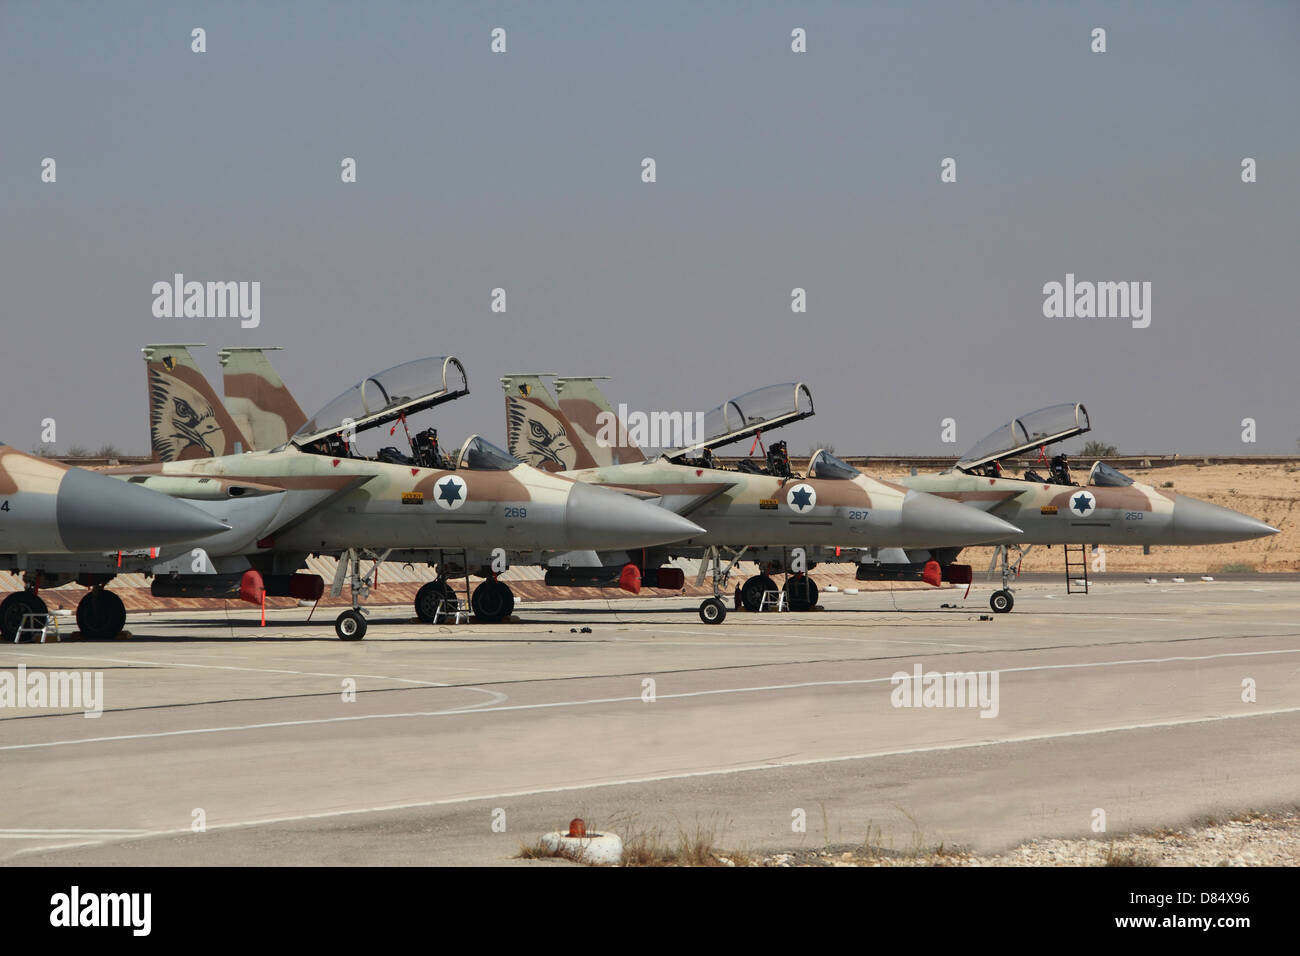 A line of F-15I Ra'am of the Israeli Air Force on display at Hatzerim Air Force Base, Israel. Stock Photo